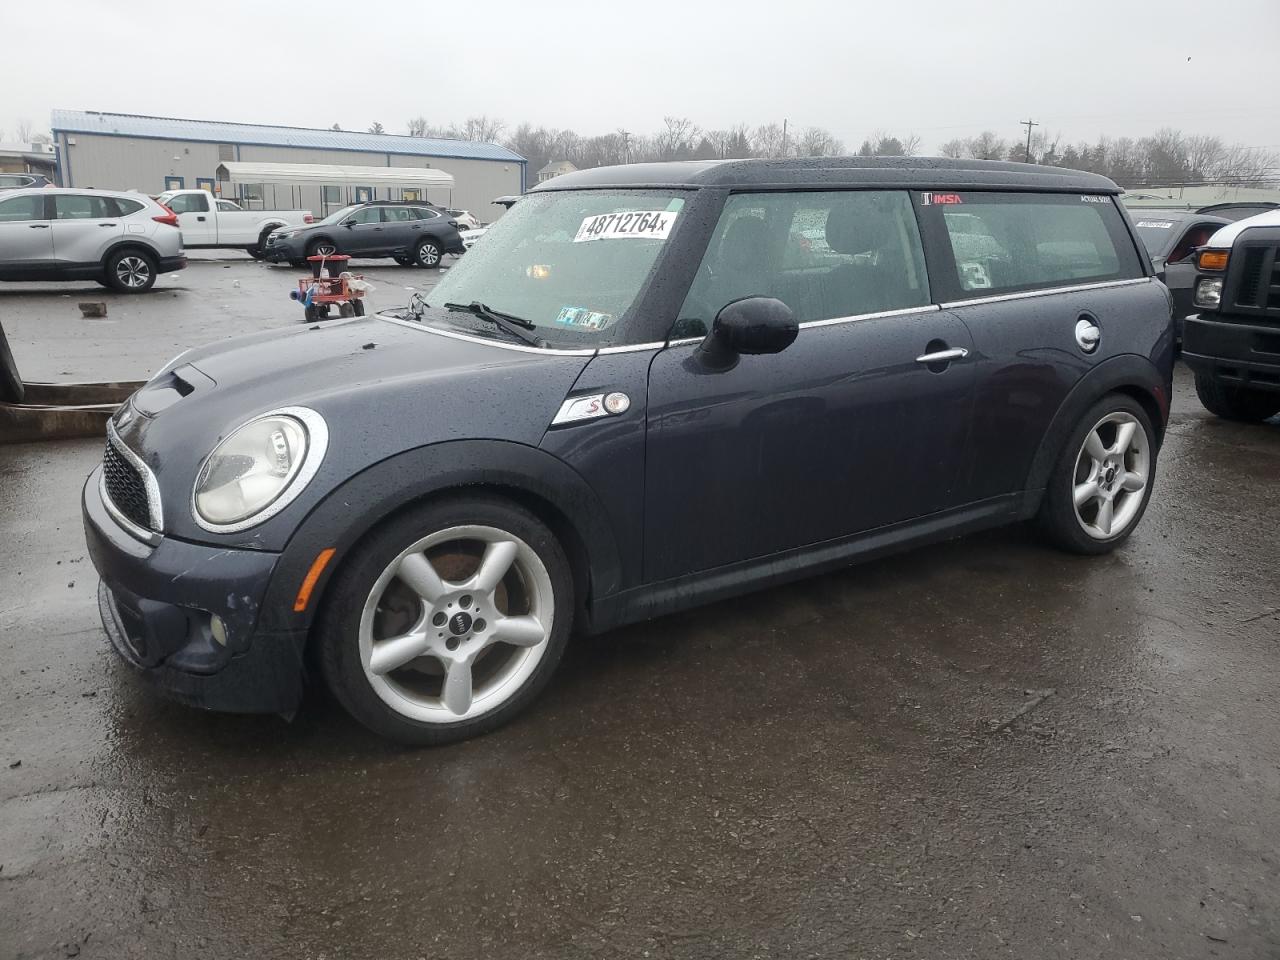 vin: WMWZG3C54CTY31478 WMWZG3C54CTY31478 2012 mini cooper 1600 for Sale in 18073 2303, Pa - Philadelphia, Pennsburg, USA